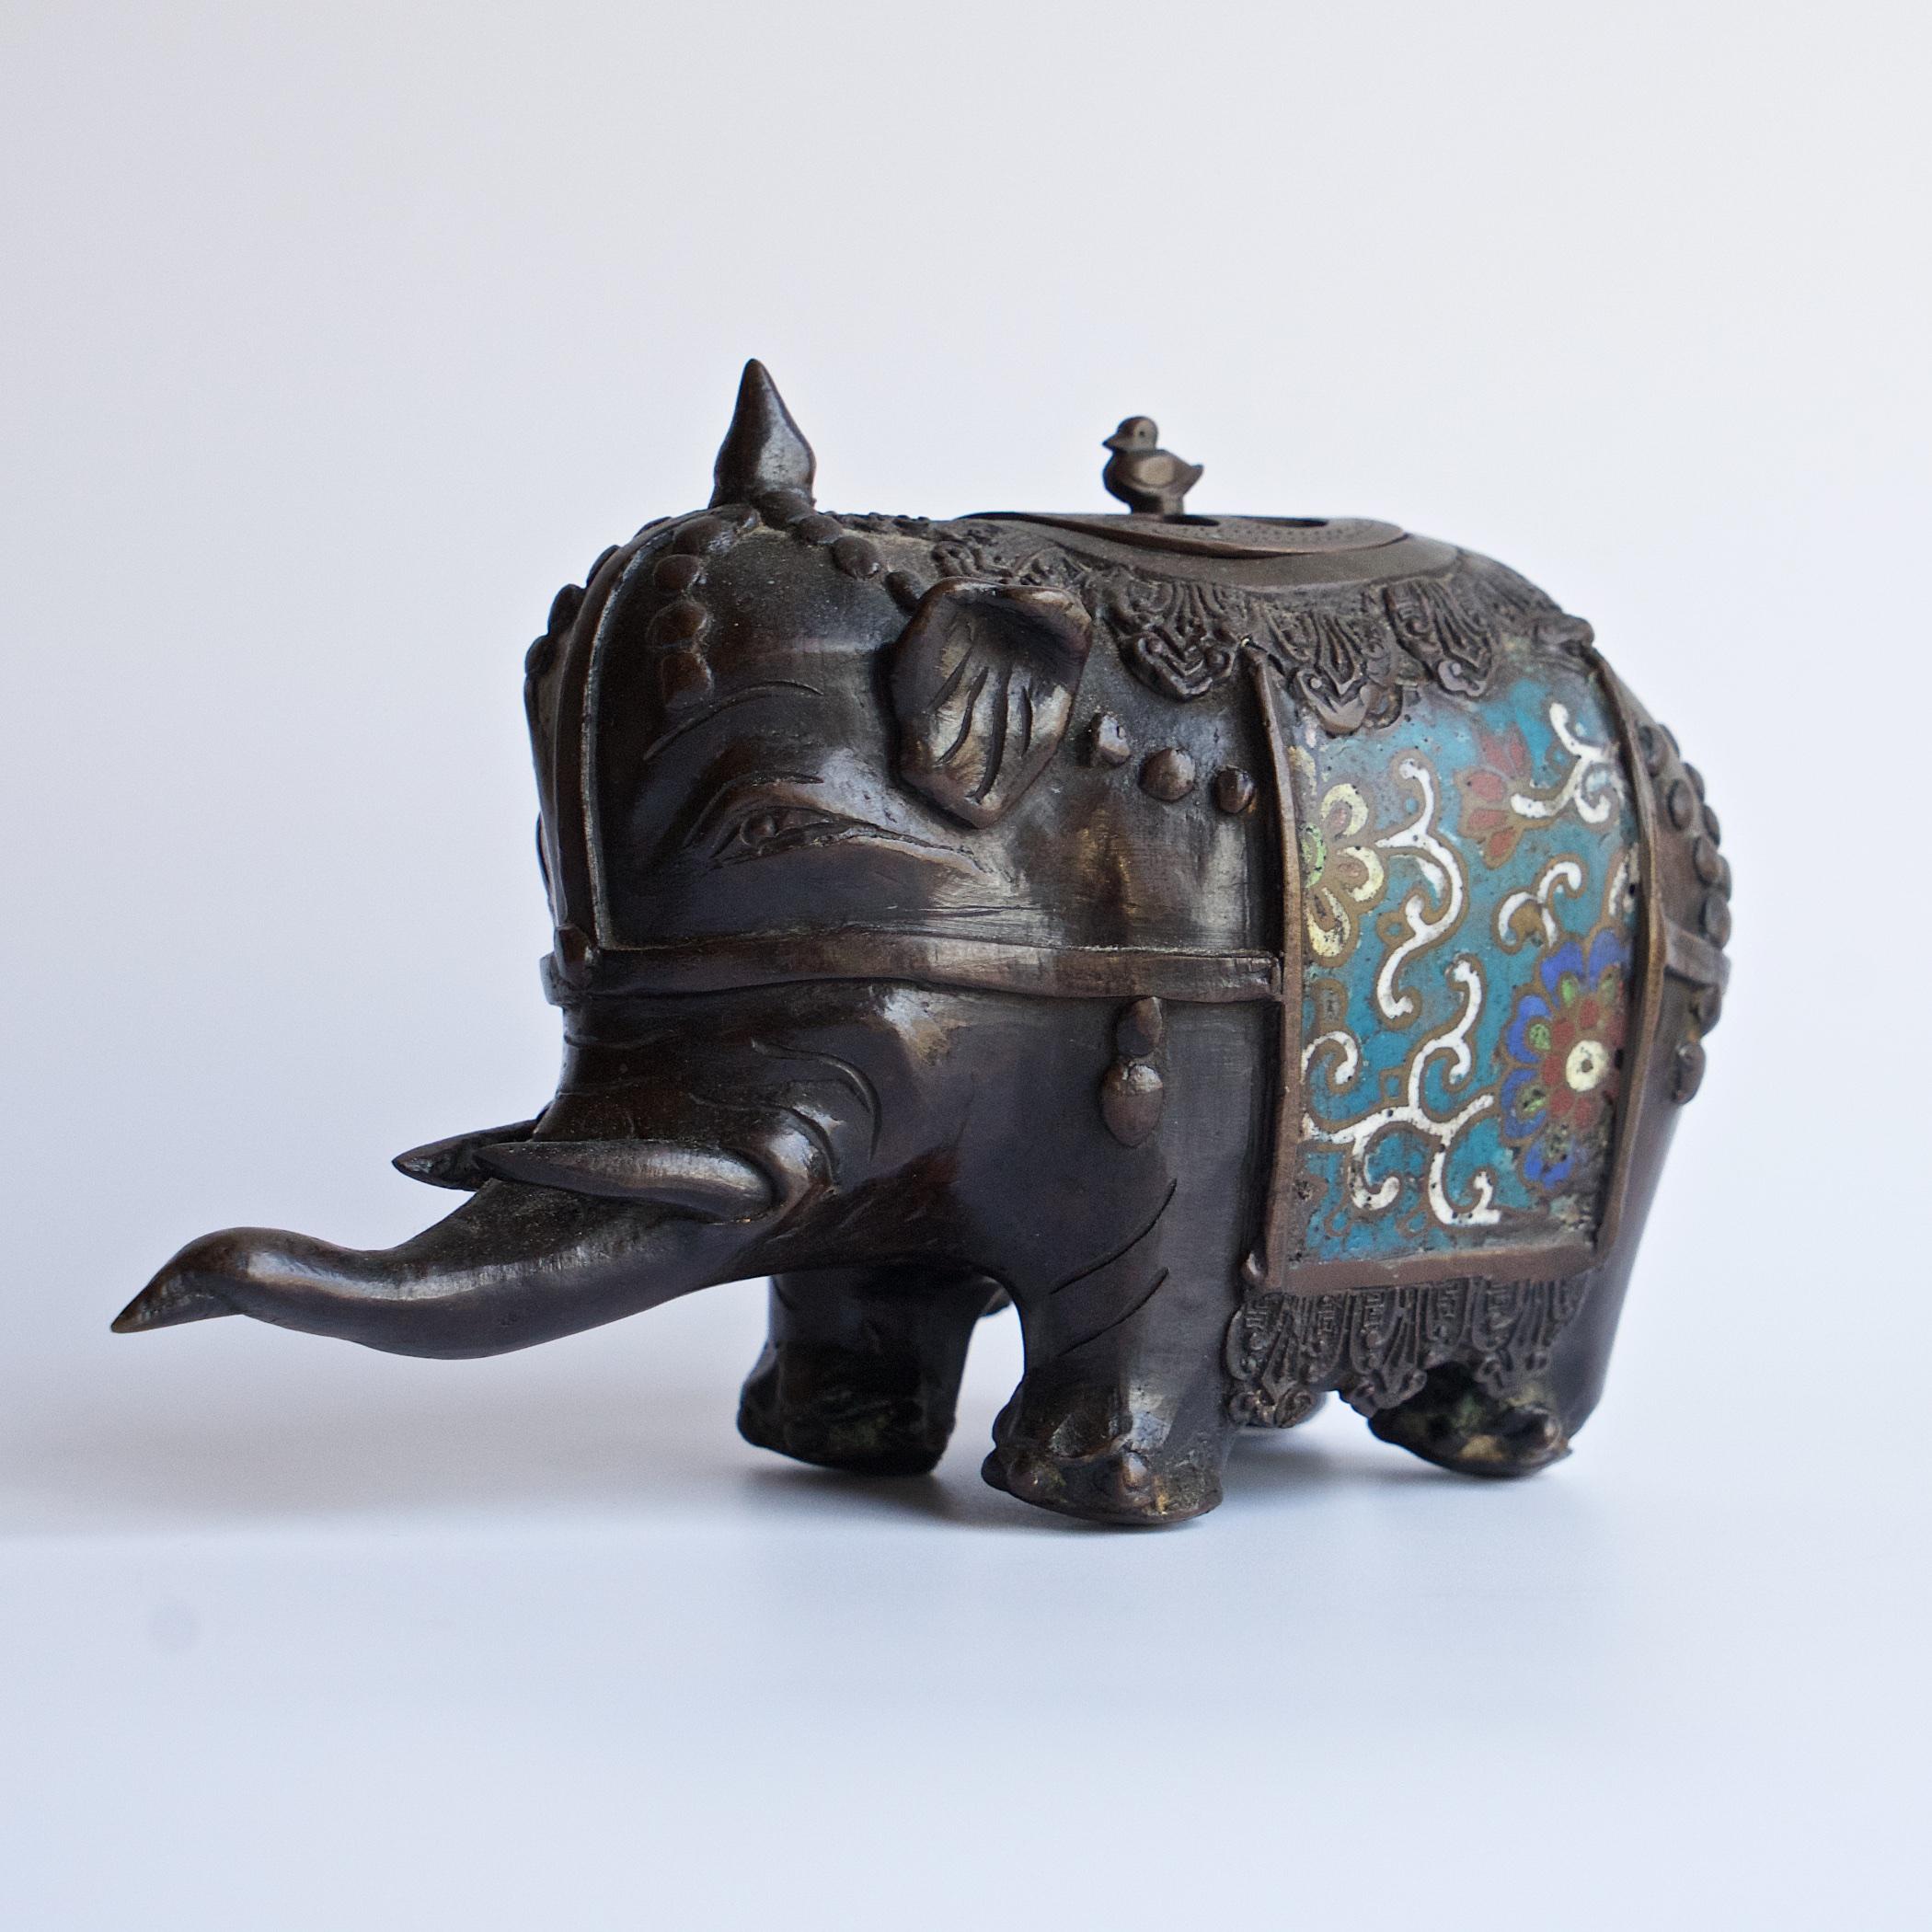 Enameled bronze elephant incense scupture, figure. Either Japanese Cloissone or French Champleve . No makers markings.